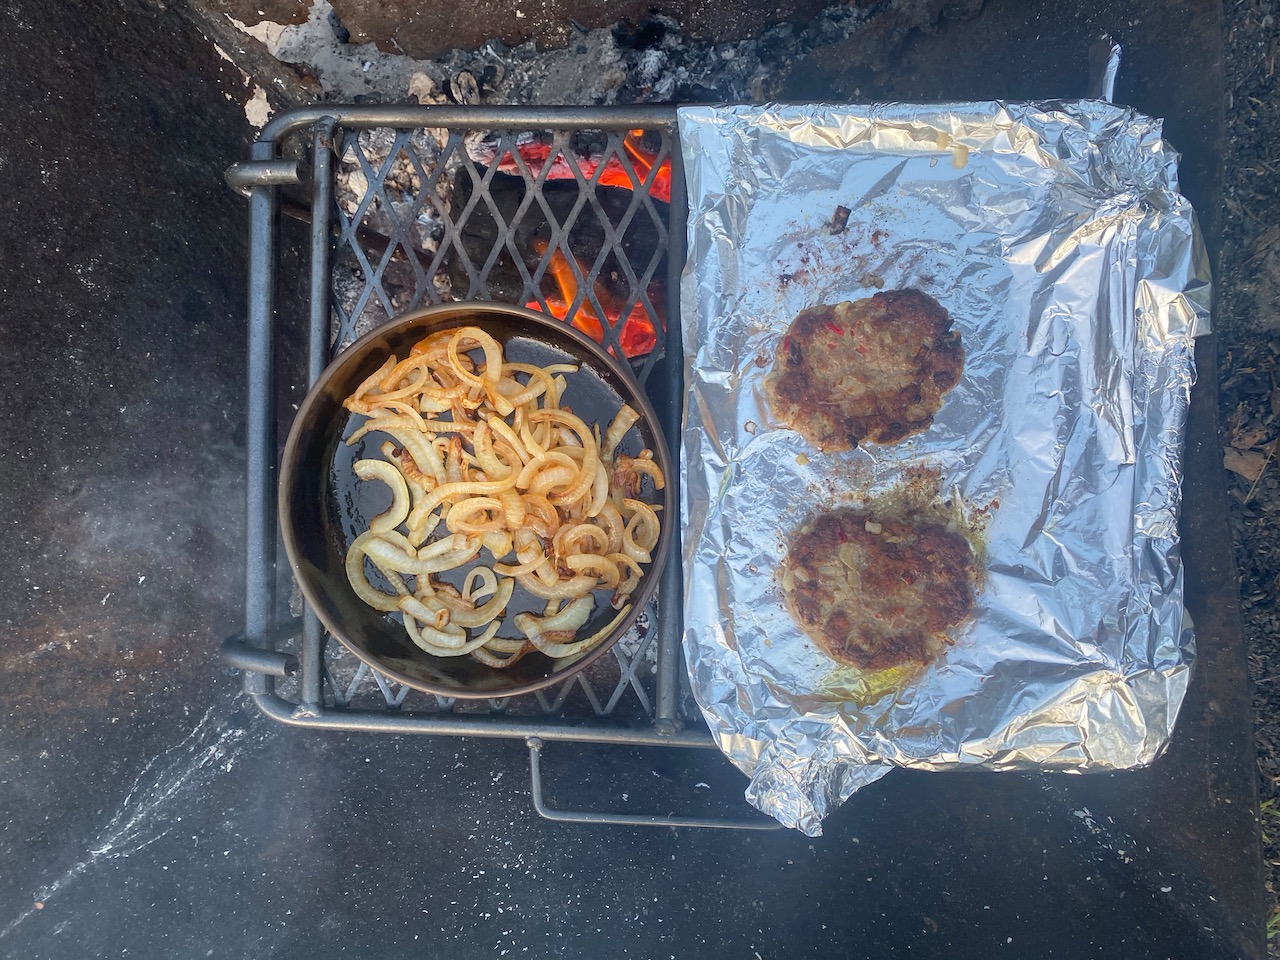 A camping grill over a wood fire, with two hamburger patties and a circular pan with fried onions